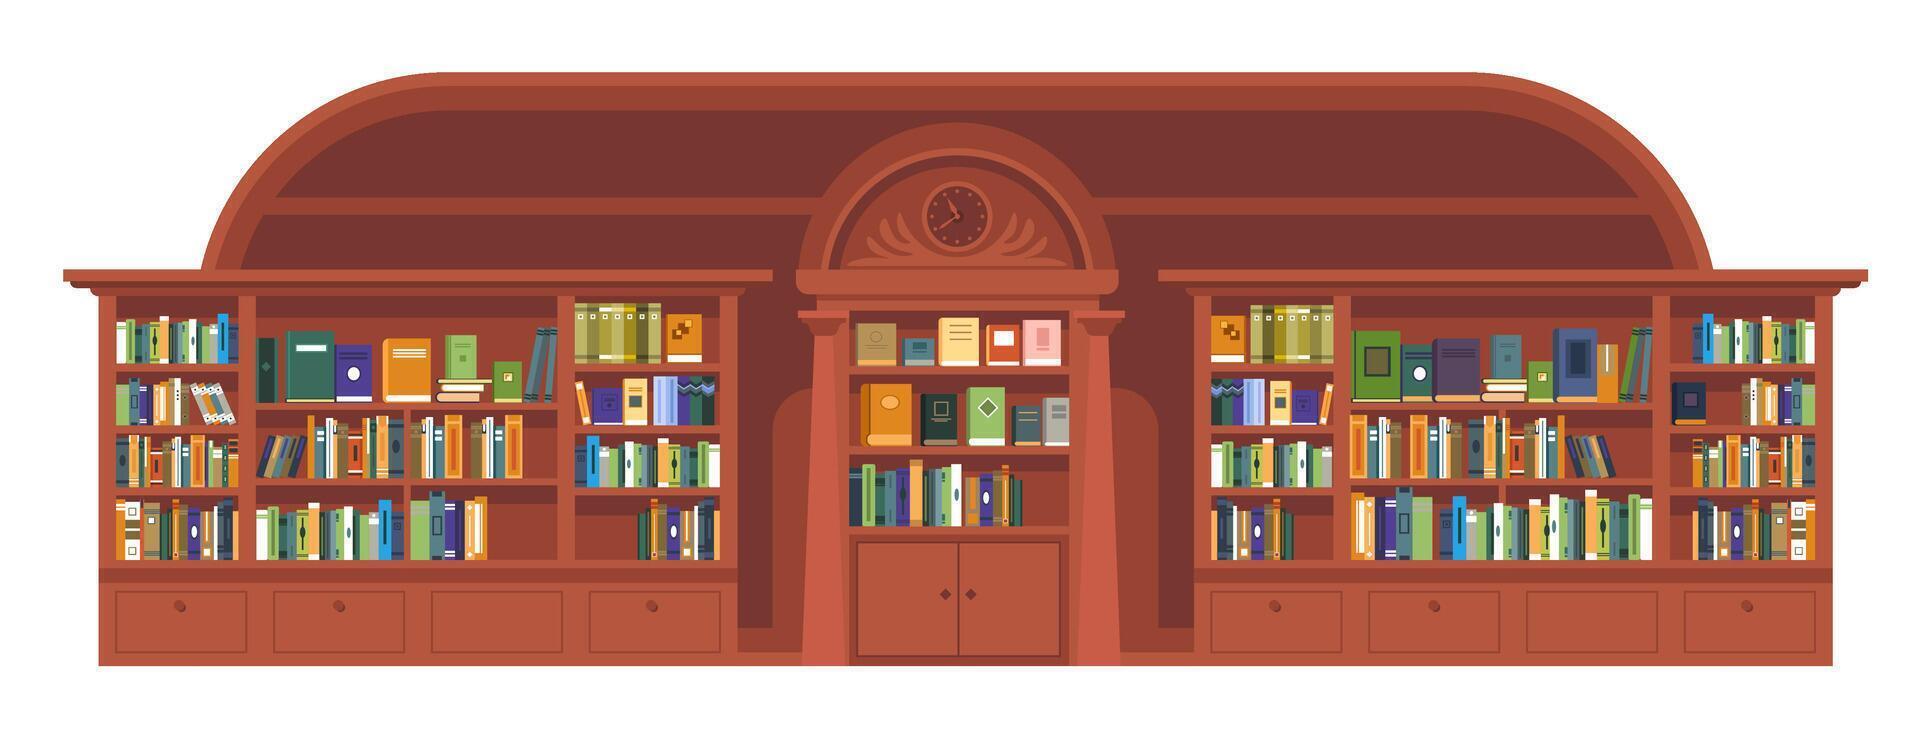 Library with books and publication for reading vector